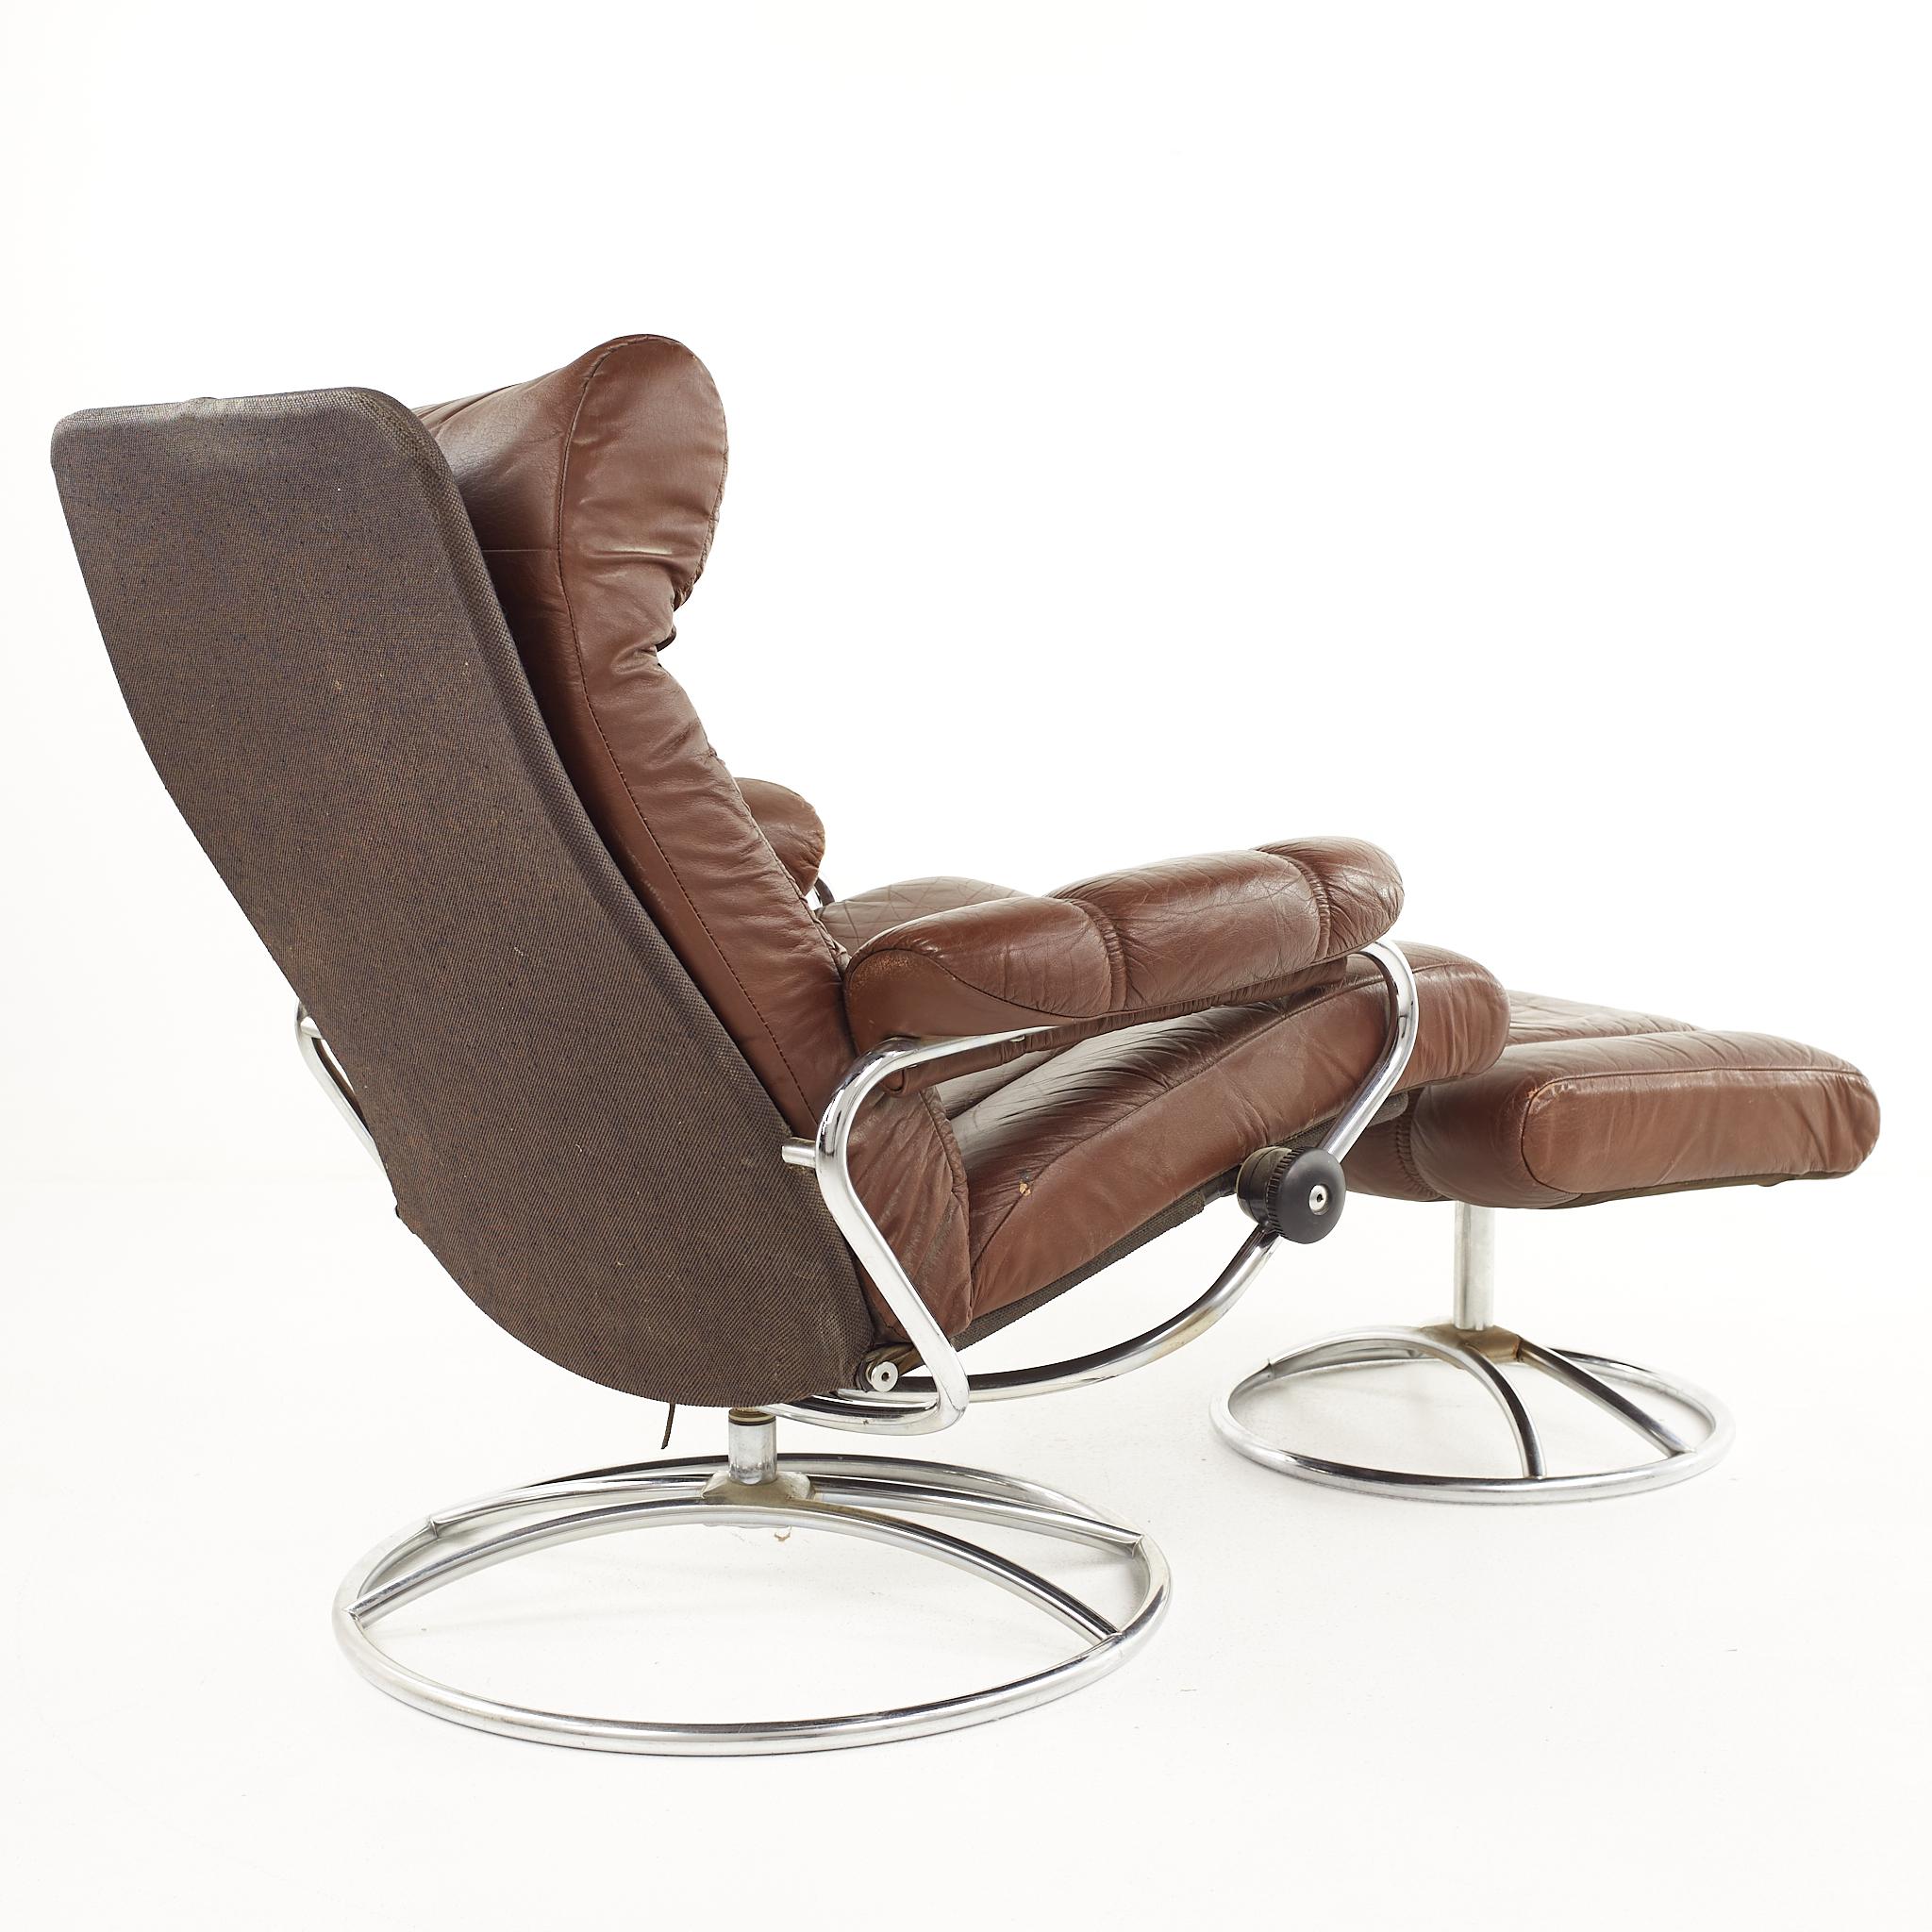 Norwegian Ekornes Mid-Century Chrome and Leather Stressless Lounge Chair and Ottoman